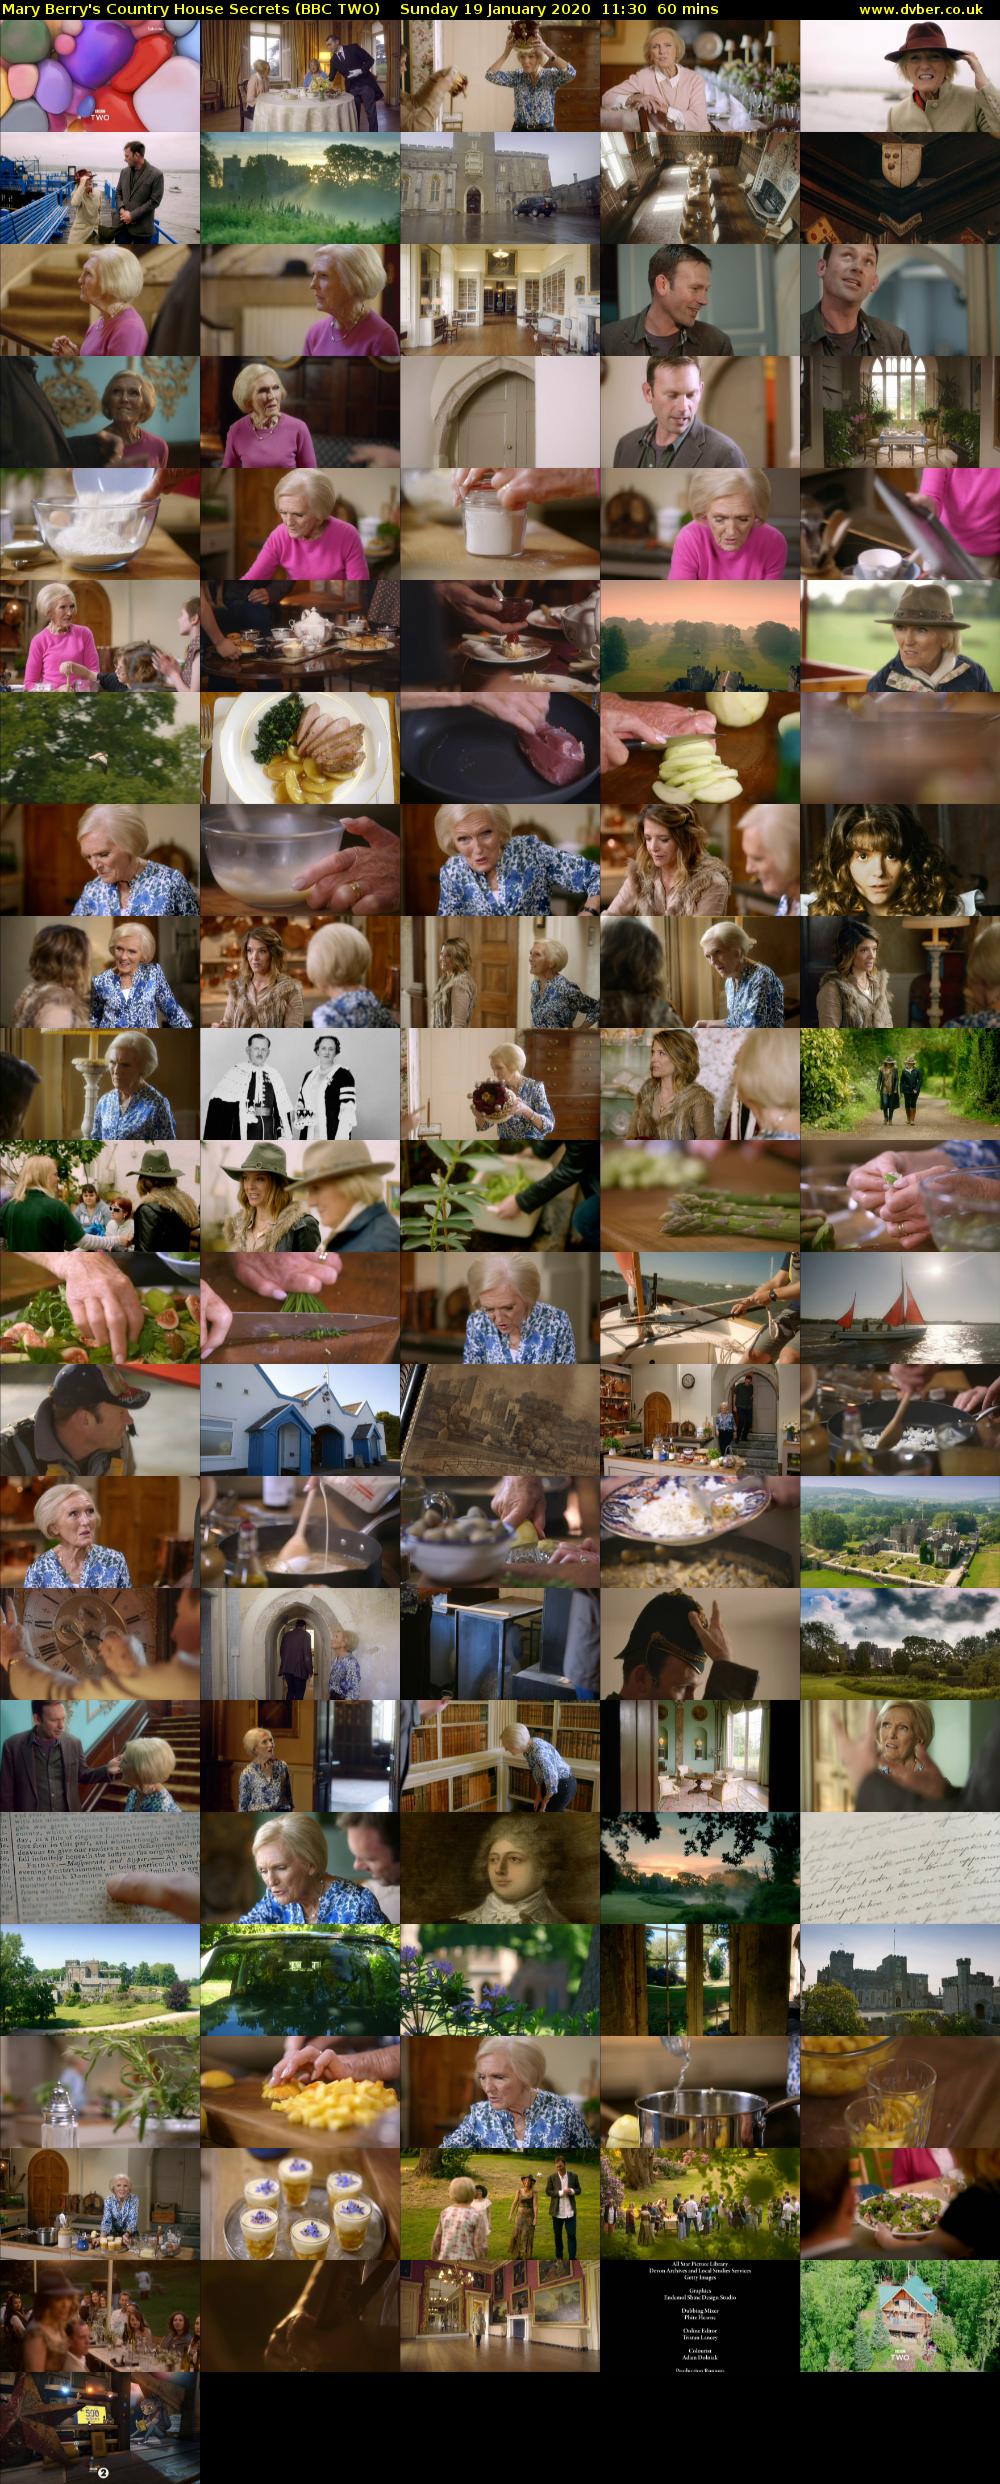 Mary Berry's Country House Secrets (BBC TWO) Sunday 19 January 2020 11:30 - 12:30